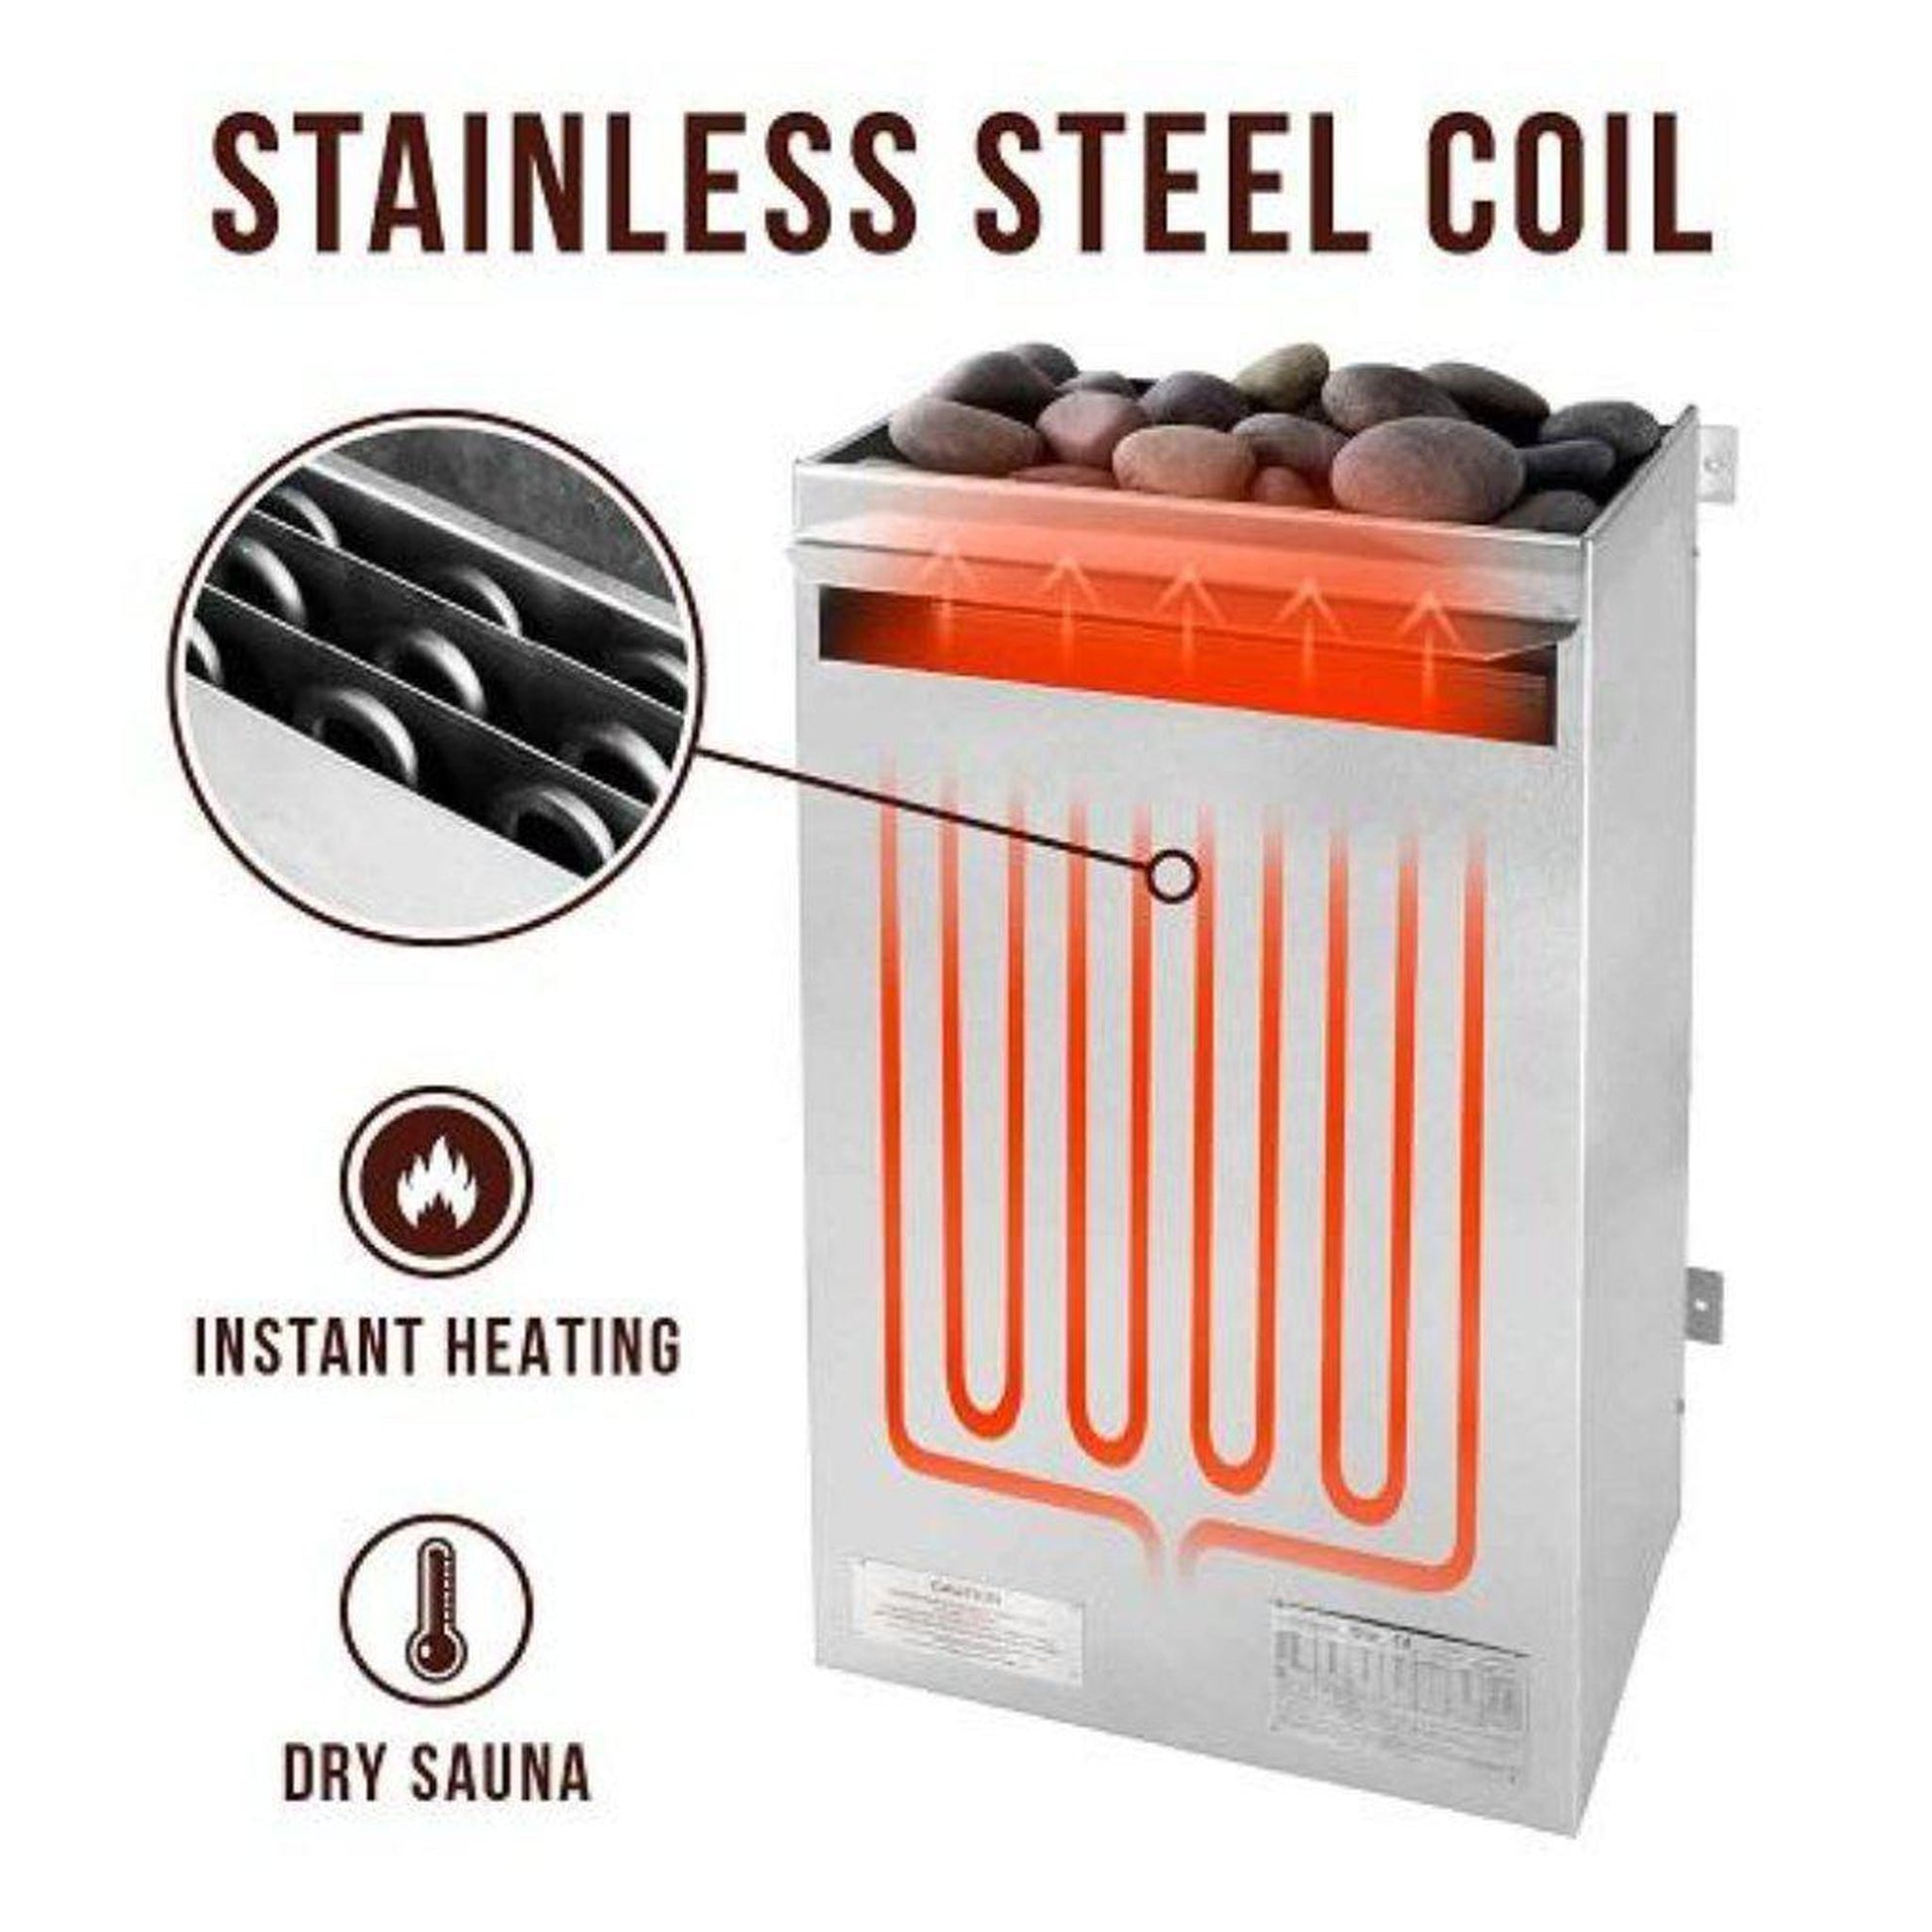 Scandia Manufacturing Electric Ultra 16" x 14" x 29" Wall Mounted Stainless Steel 7.5 kW 240V Medium Sauna Heater with Built-in Thermostat